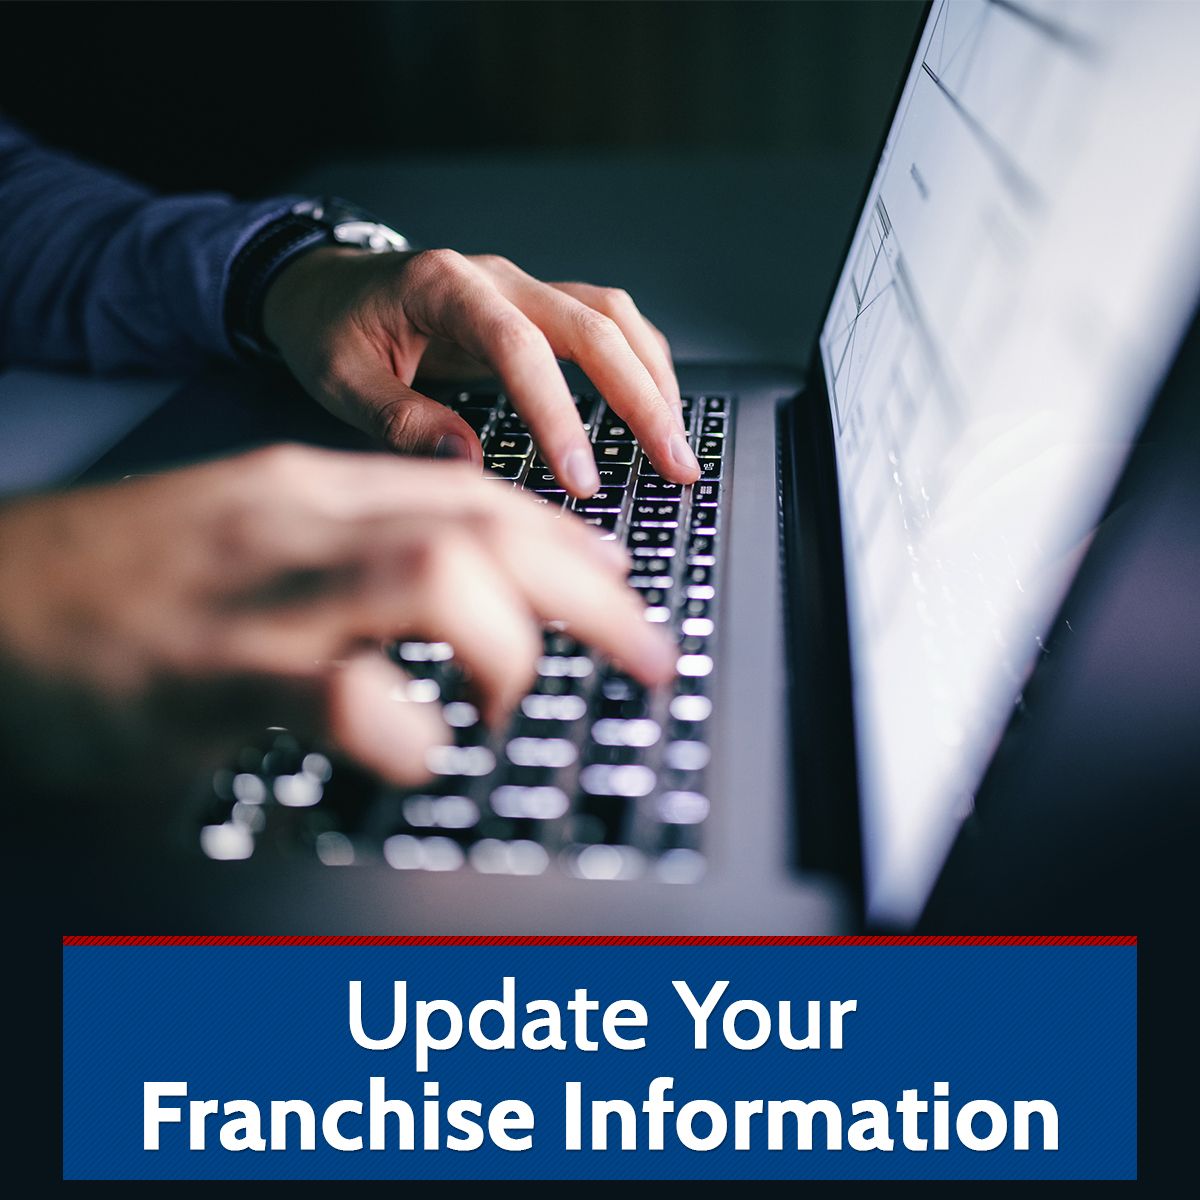 Update Your Franchise Information